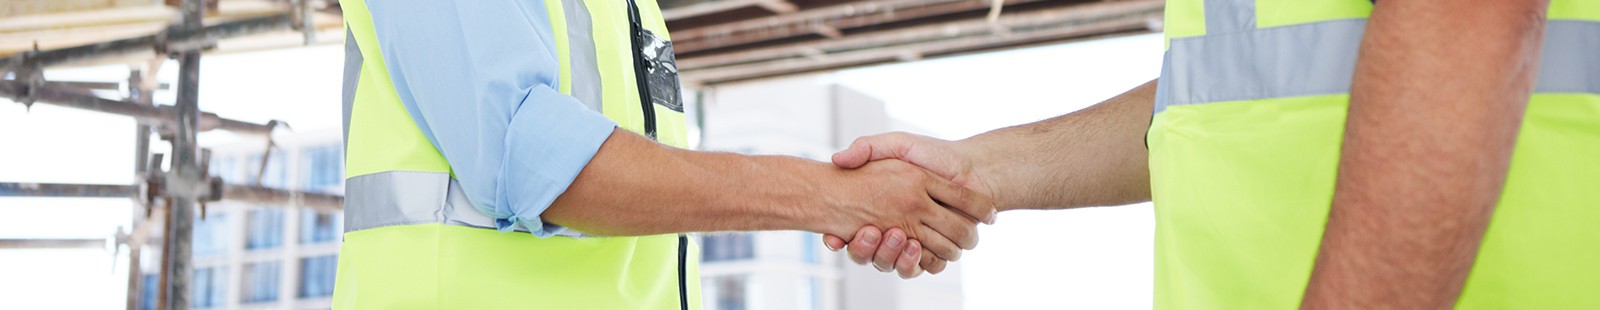 construction workers building relationships